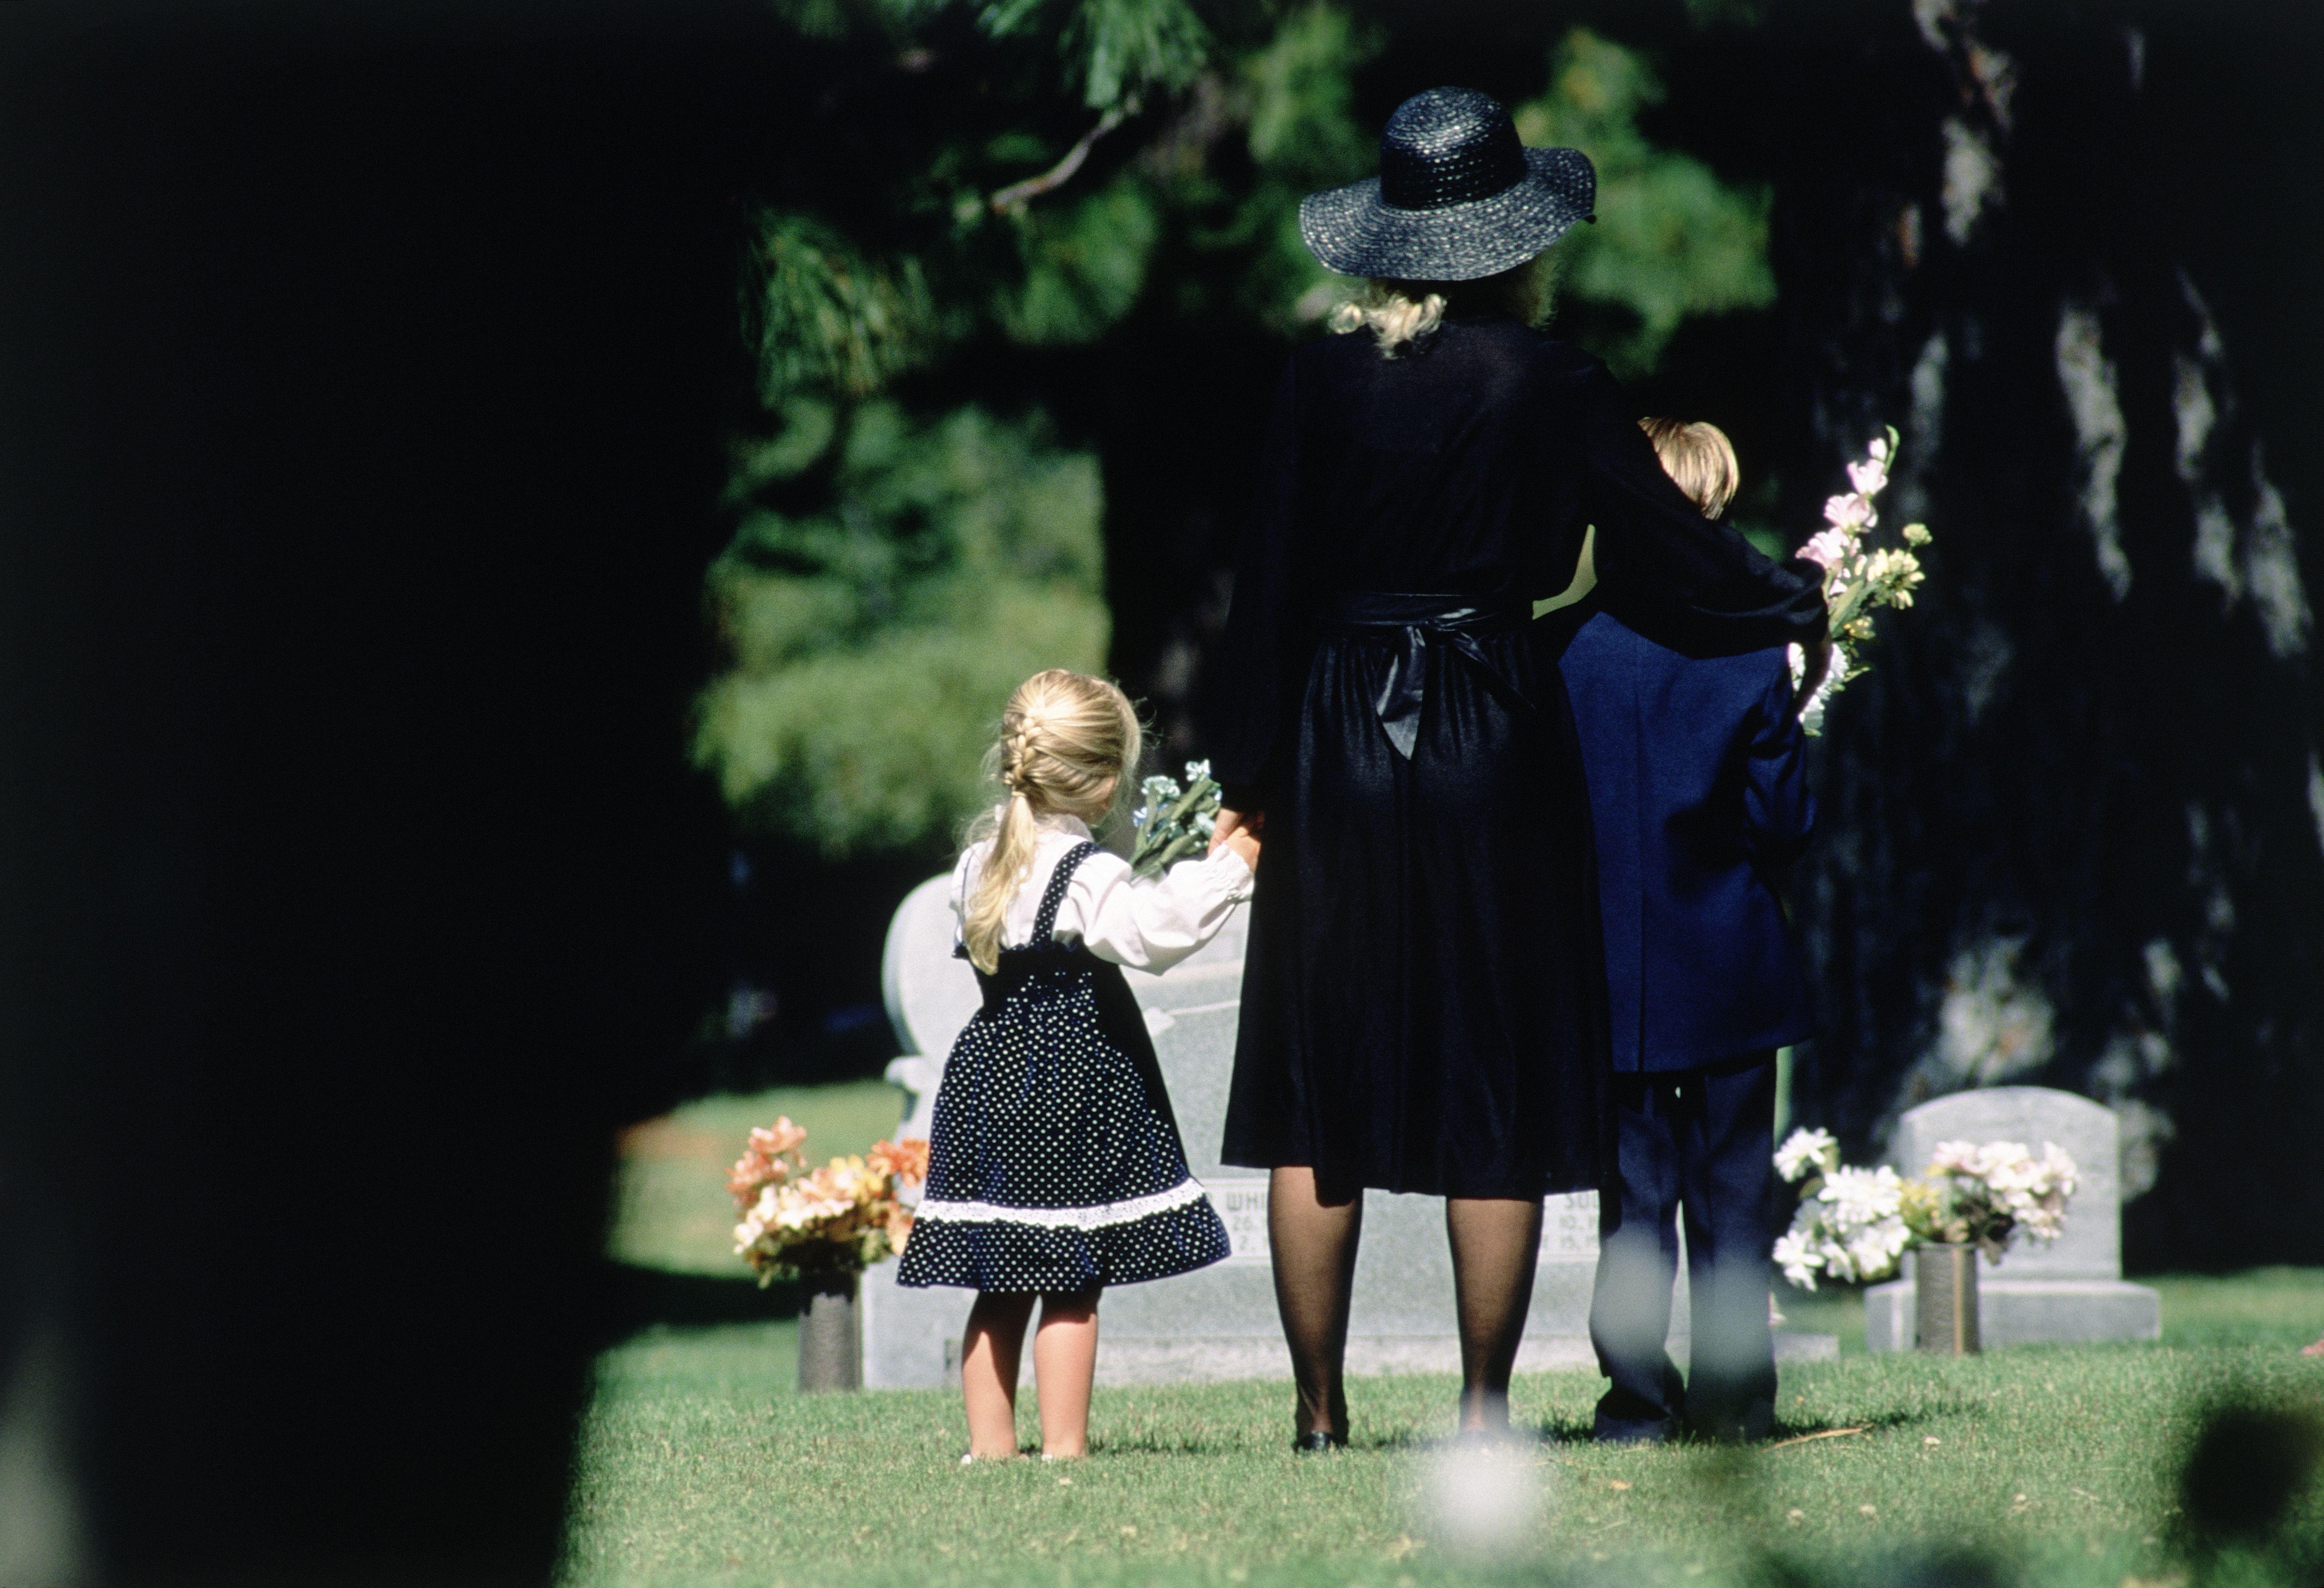 A mother and her children attend a funeral | Source: Getty Images